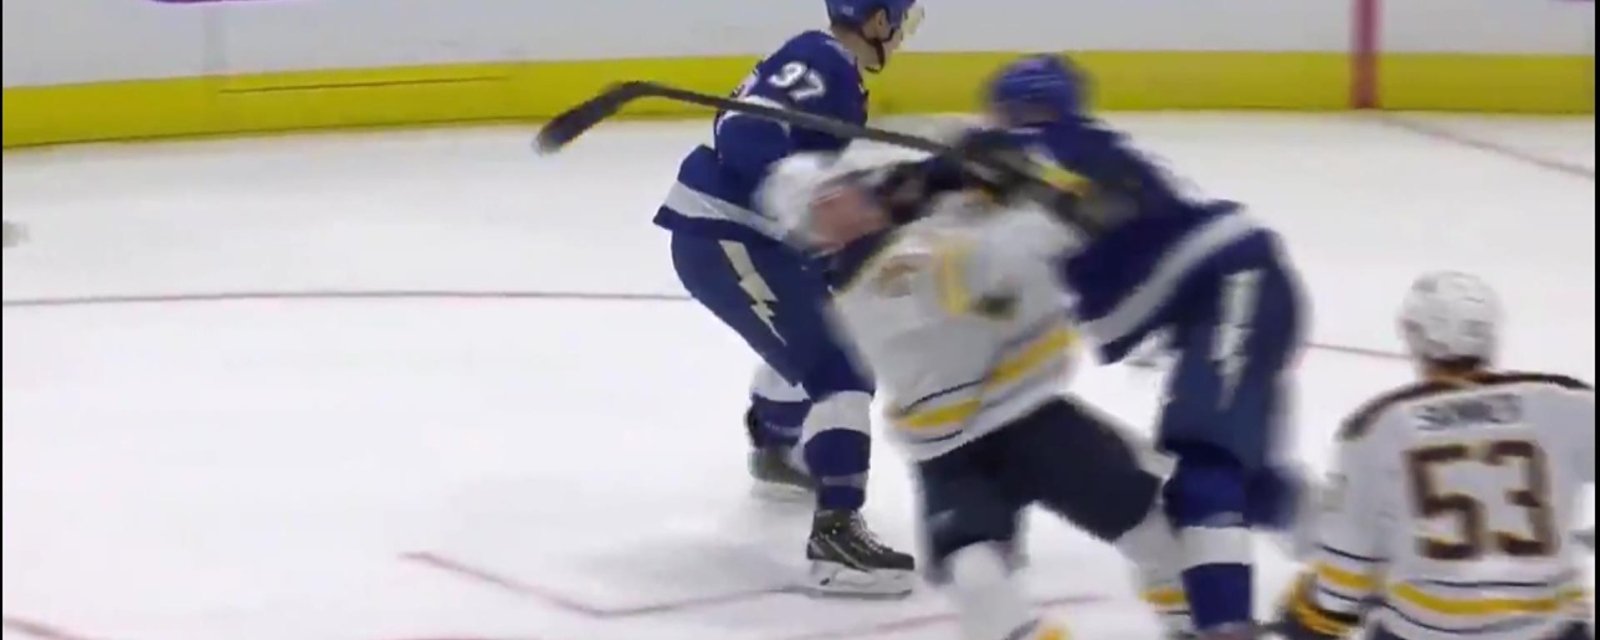 Erik Cernak reaches out to Dahlin after giving him a concussion